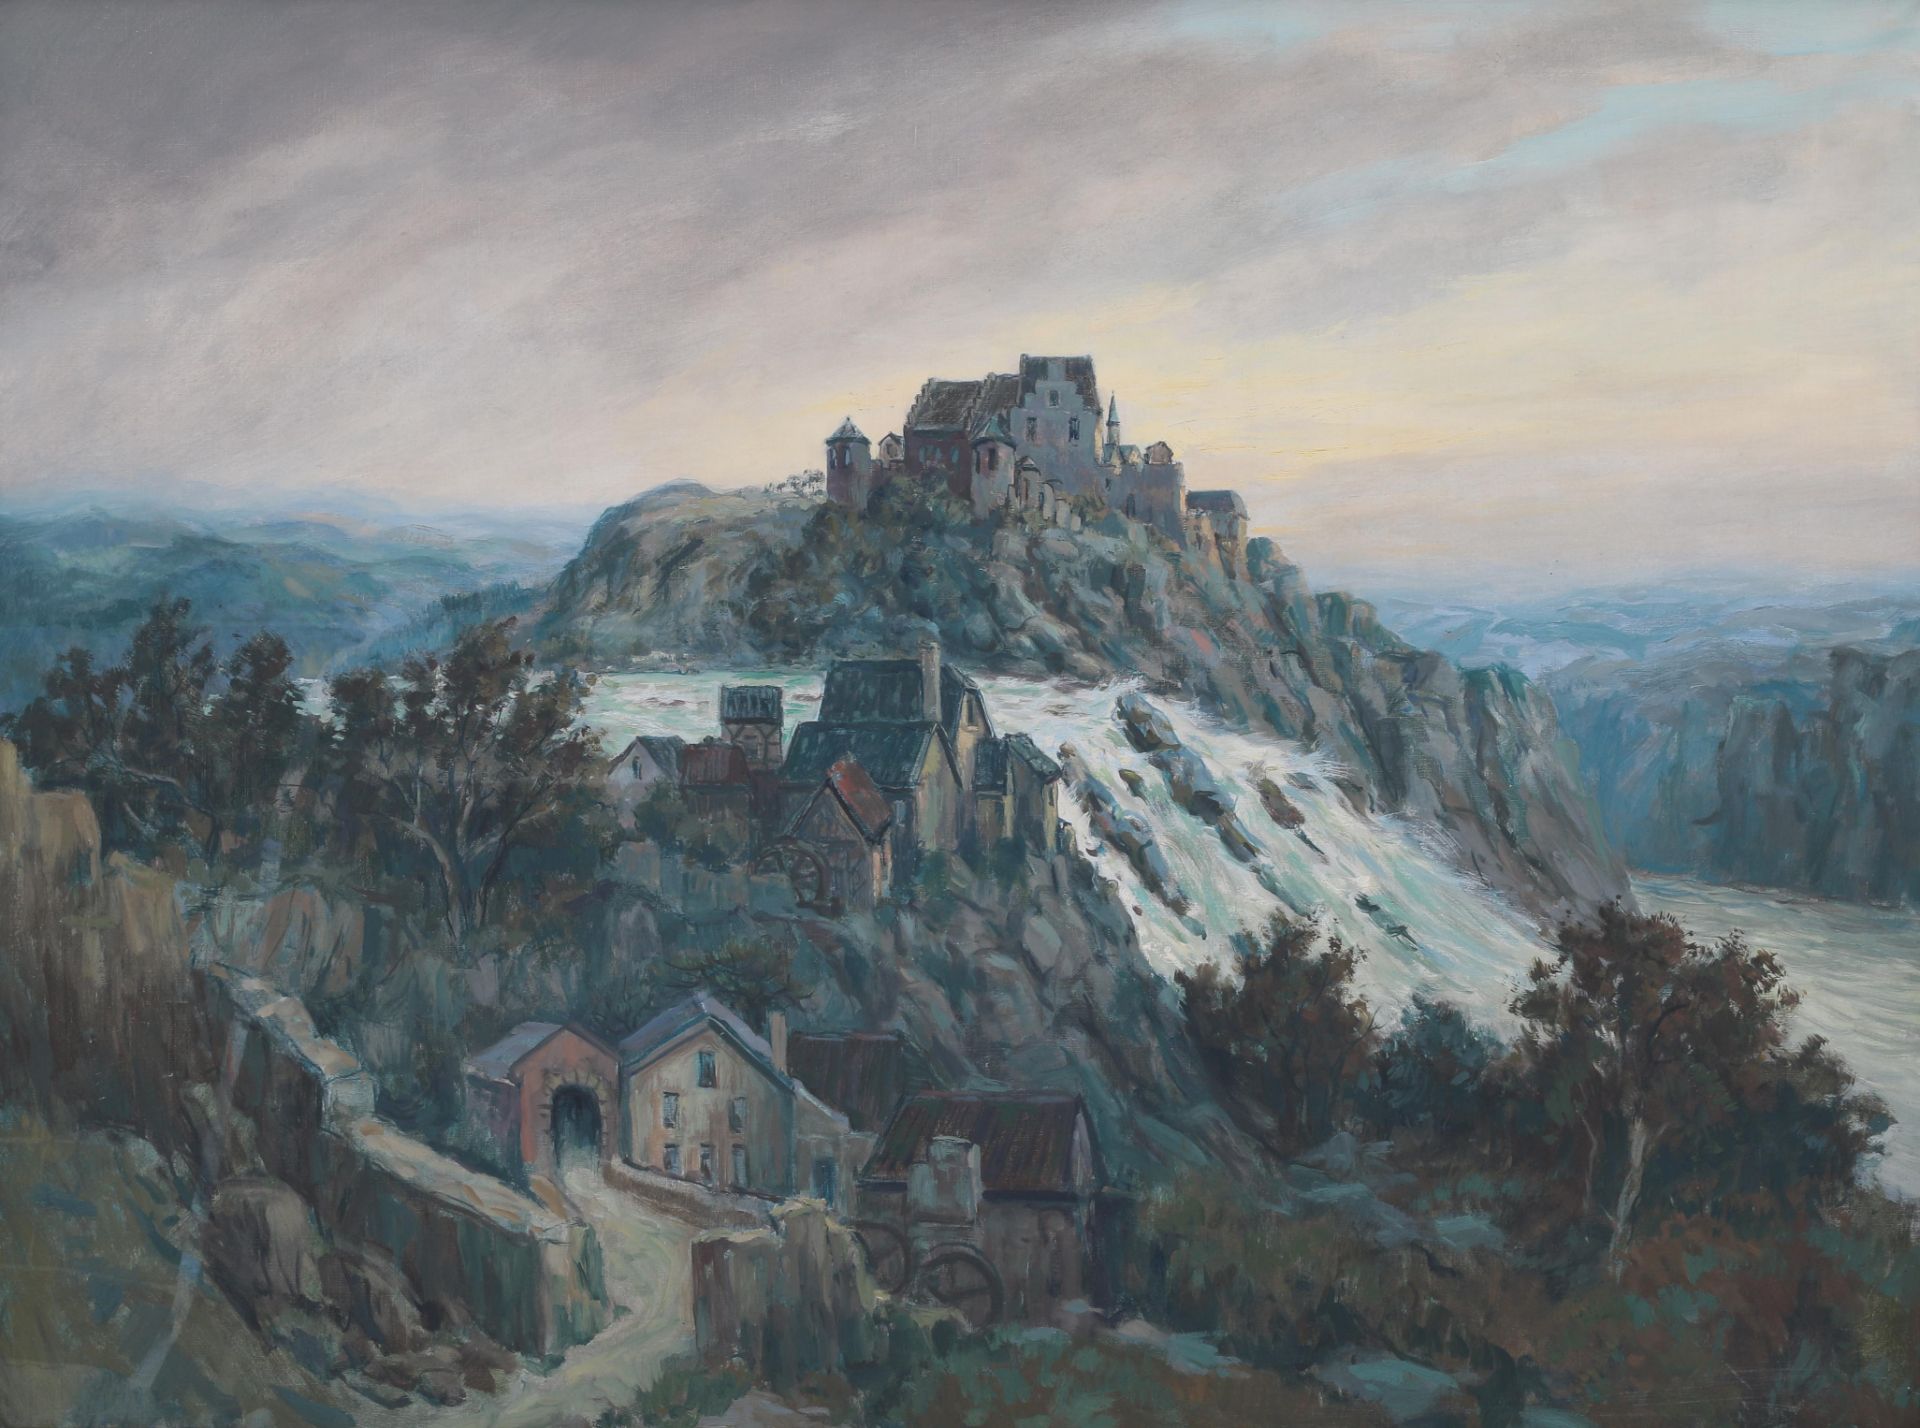 Martin van Waning (1889-1972) German landscape with a castle on a hill. Depicted in: Louise Mellema,